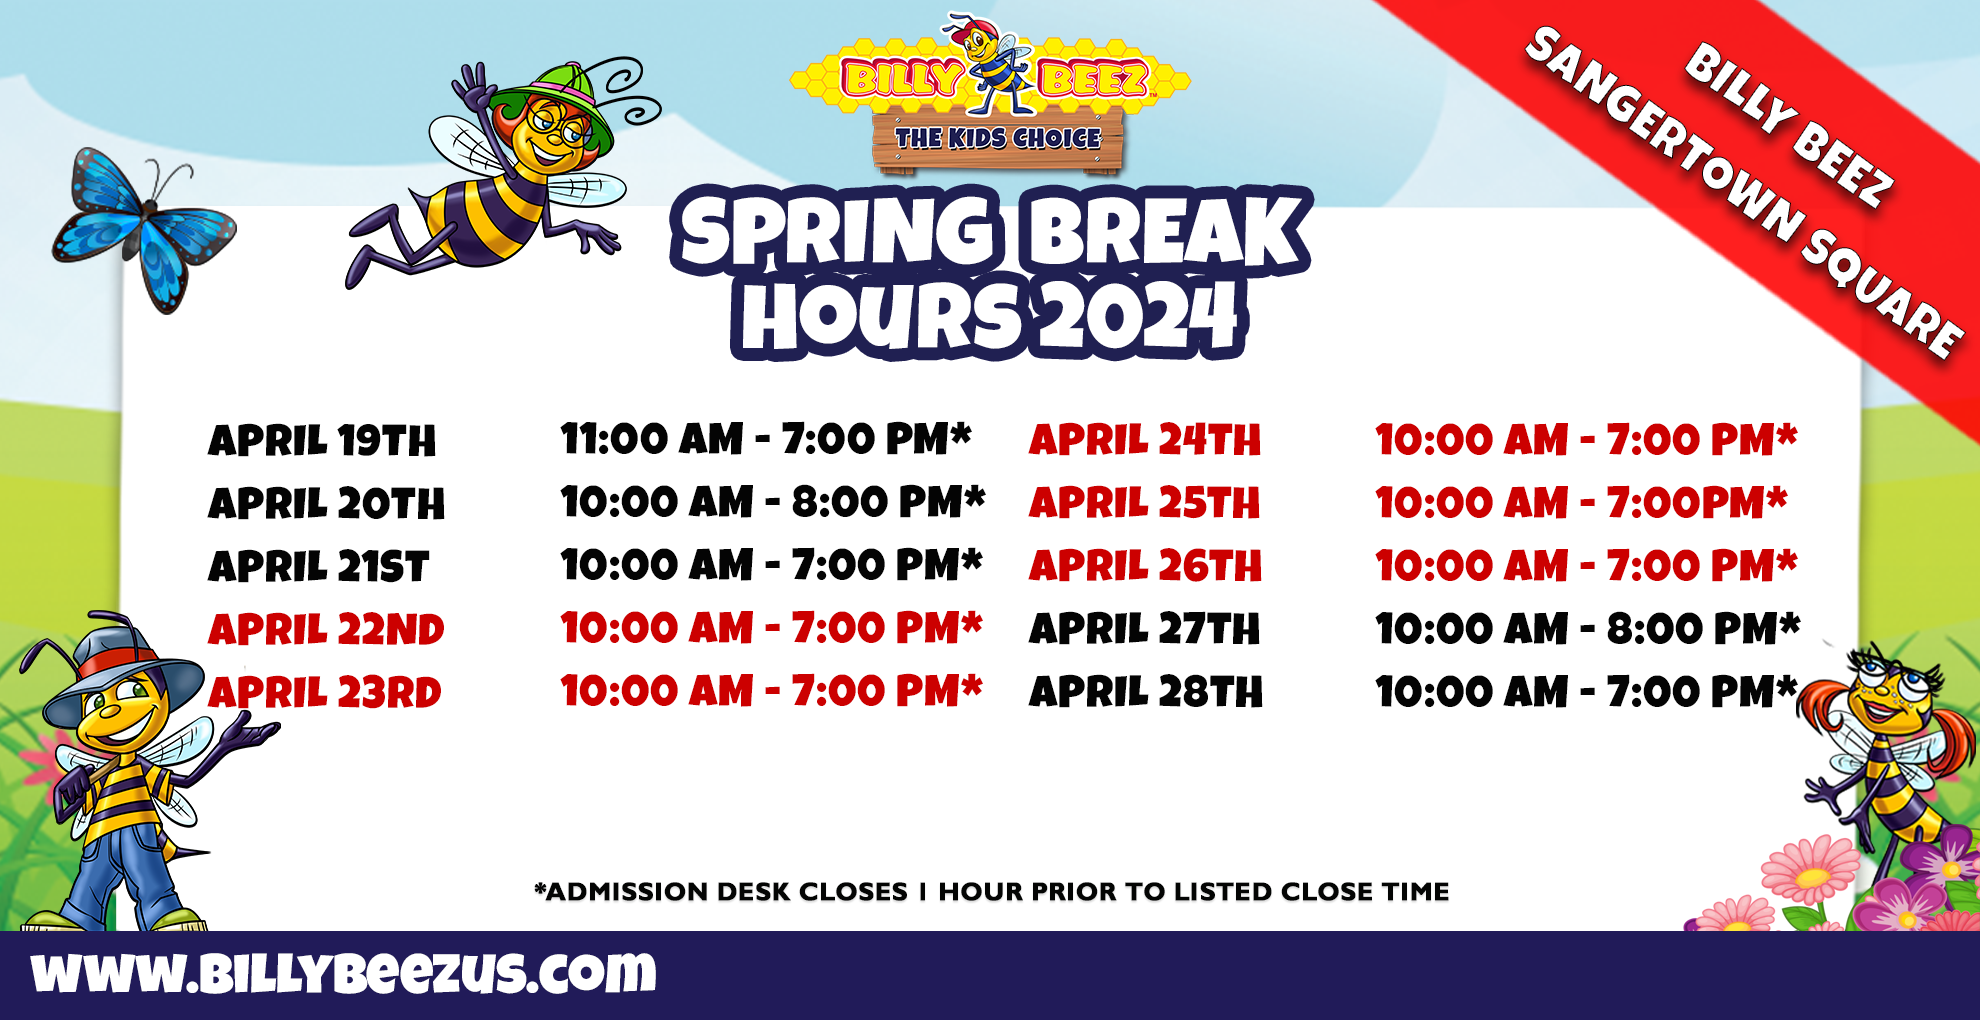 Billy Beez The Kids Place Billy Beez Sangertown Square Spring Break Hours 2024 April 19th 11:00am-7:00am* April 20th 10:00am-8:00pm* April 21st 10:00am-7:00pm* April 22nd 10:00am-7:00pm* April 23rd 10:00am-7:00pm* April 24th 10:00am-7:00pm* April 25th 10:00am-7:00pm* April 26th 10:00am-7:00pm* April 27th 10:00am-8:00pm* April 28th 10:00am-7:00pm* *Admission desk closes 1 hour prior to listed close time